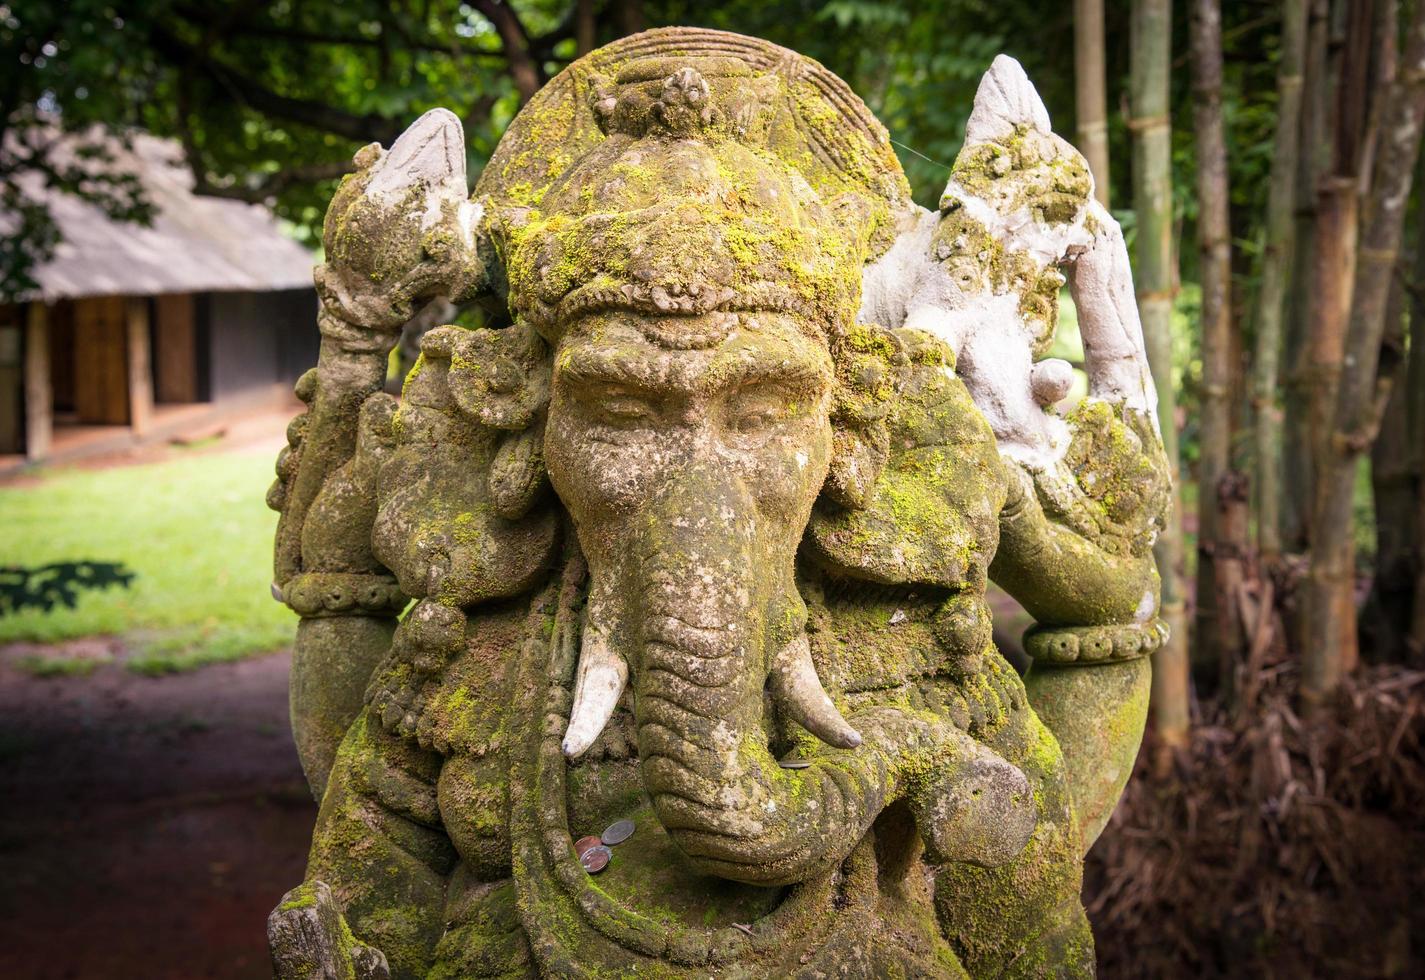 The stone sculpture of Ganesha the lord of success in Hindu religion. photo